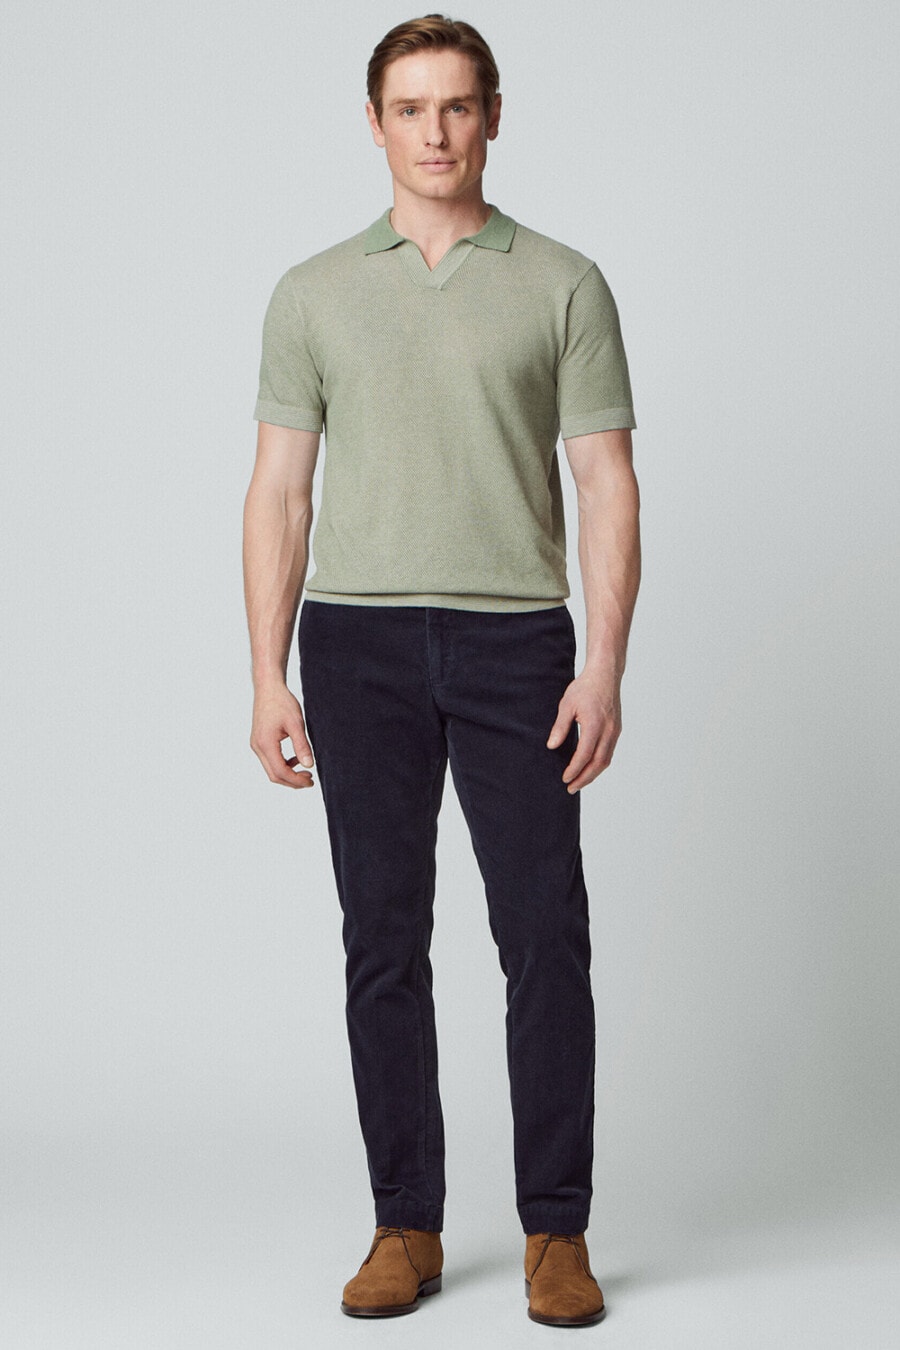 Men's navy pants, light green knitted polo shirt and tan suede chukka boots outfit